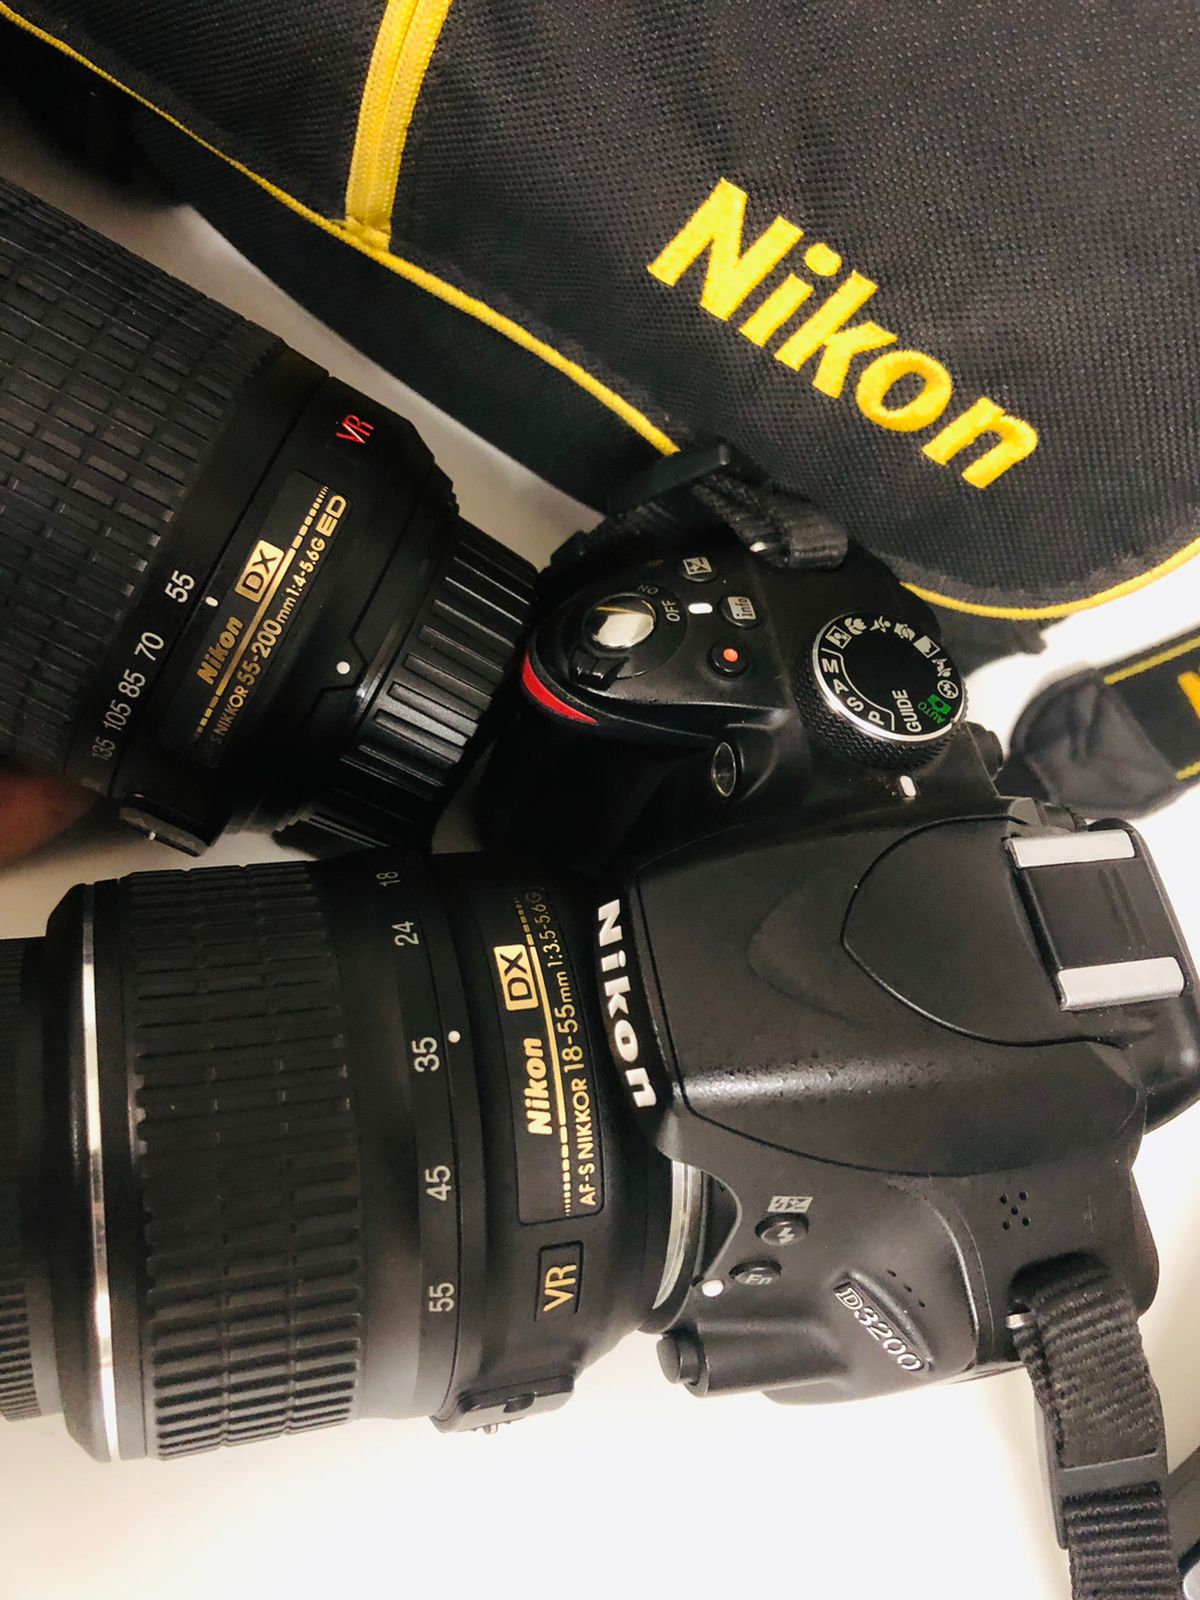 NIKON D3200 with 2 lens and accessories